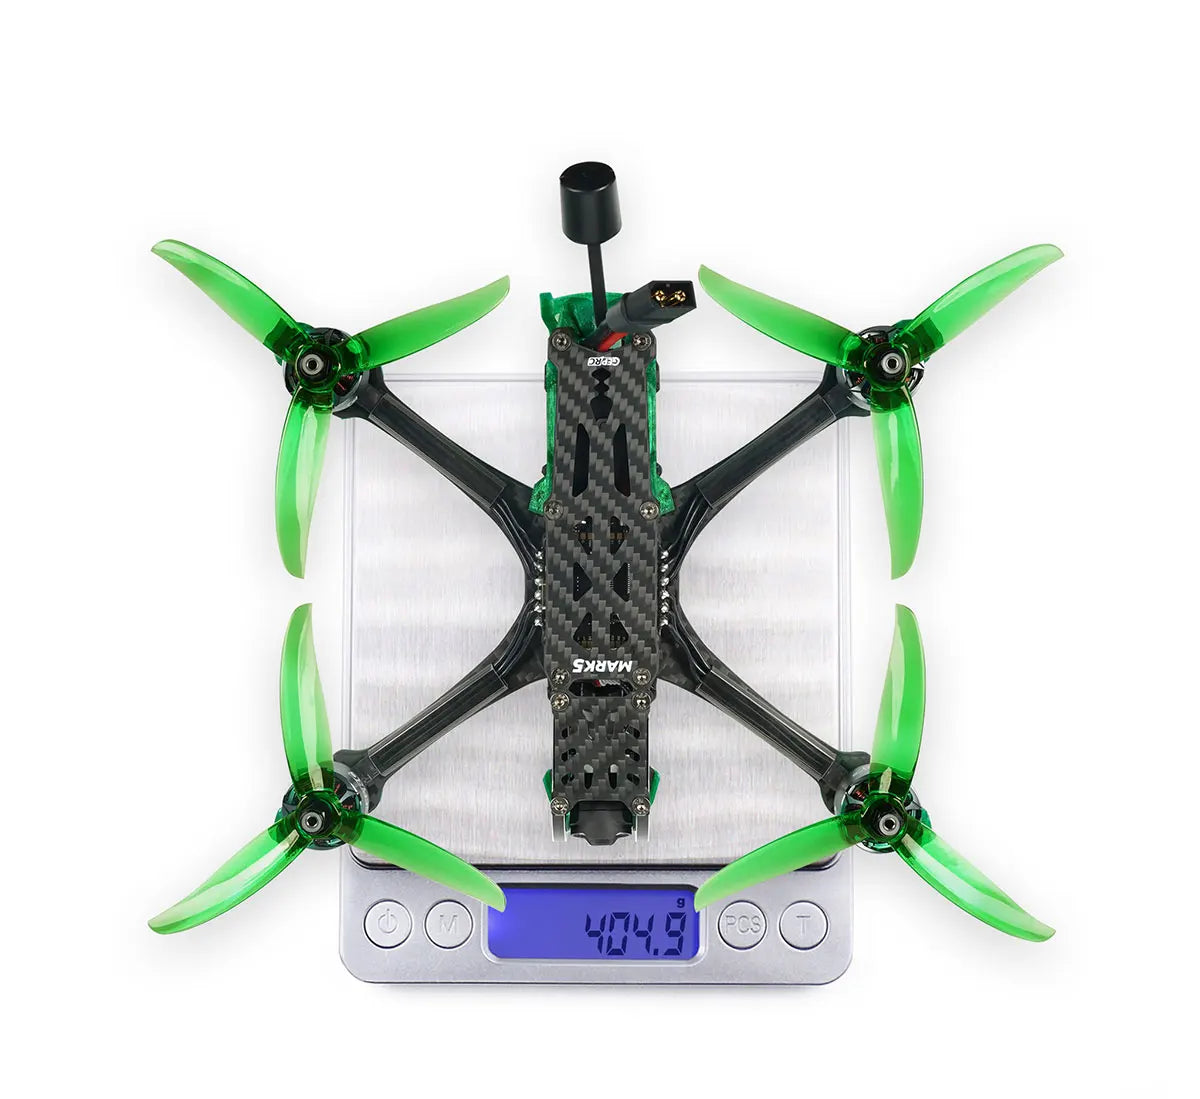 GEPRC New MARK5 HD O3 Freestyle FPV Drone, the new VTX of O3 air unit pushed the digital system to a new